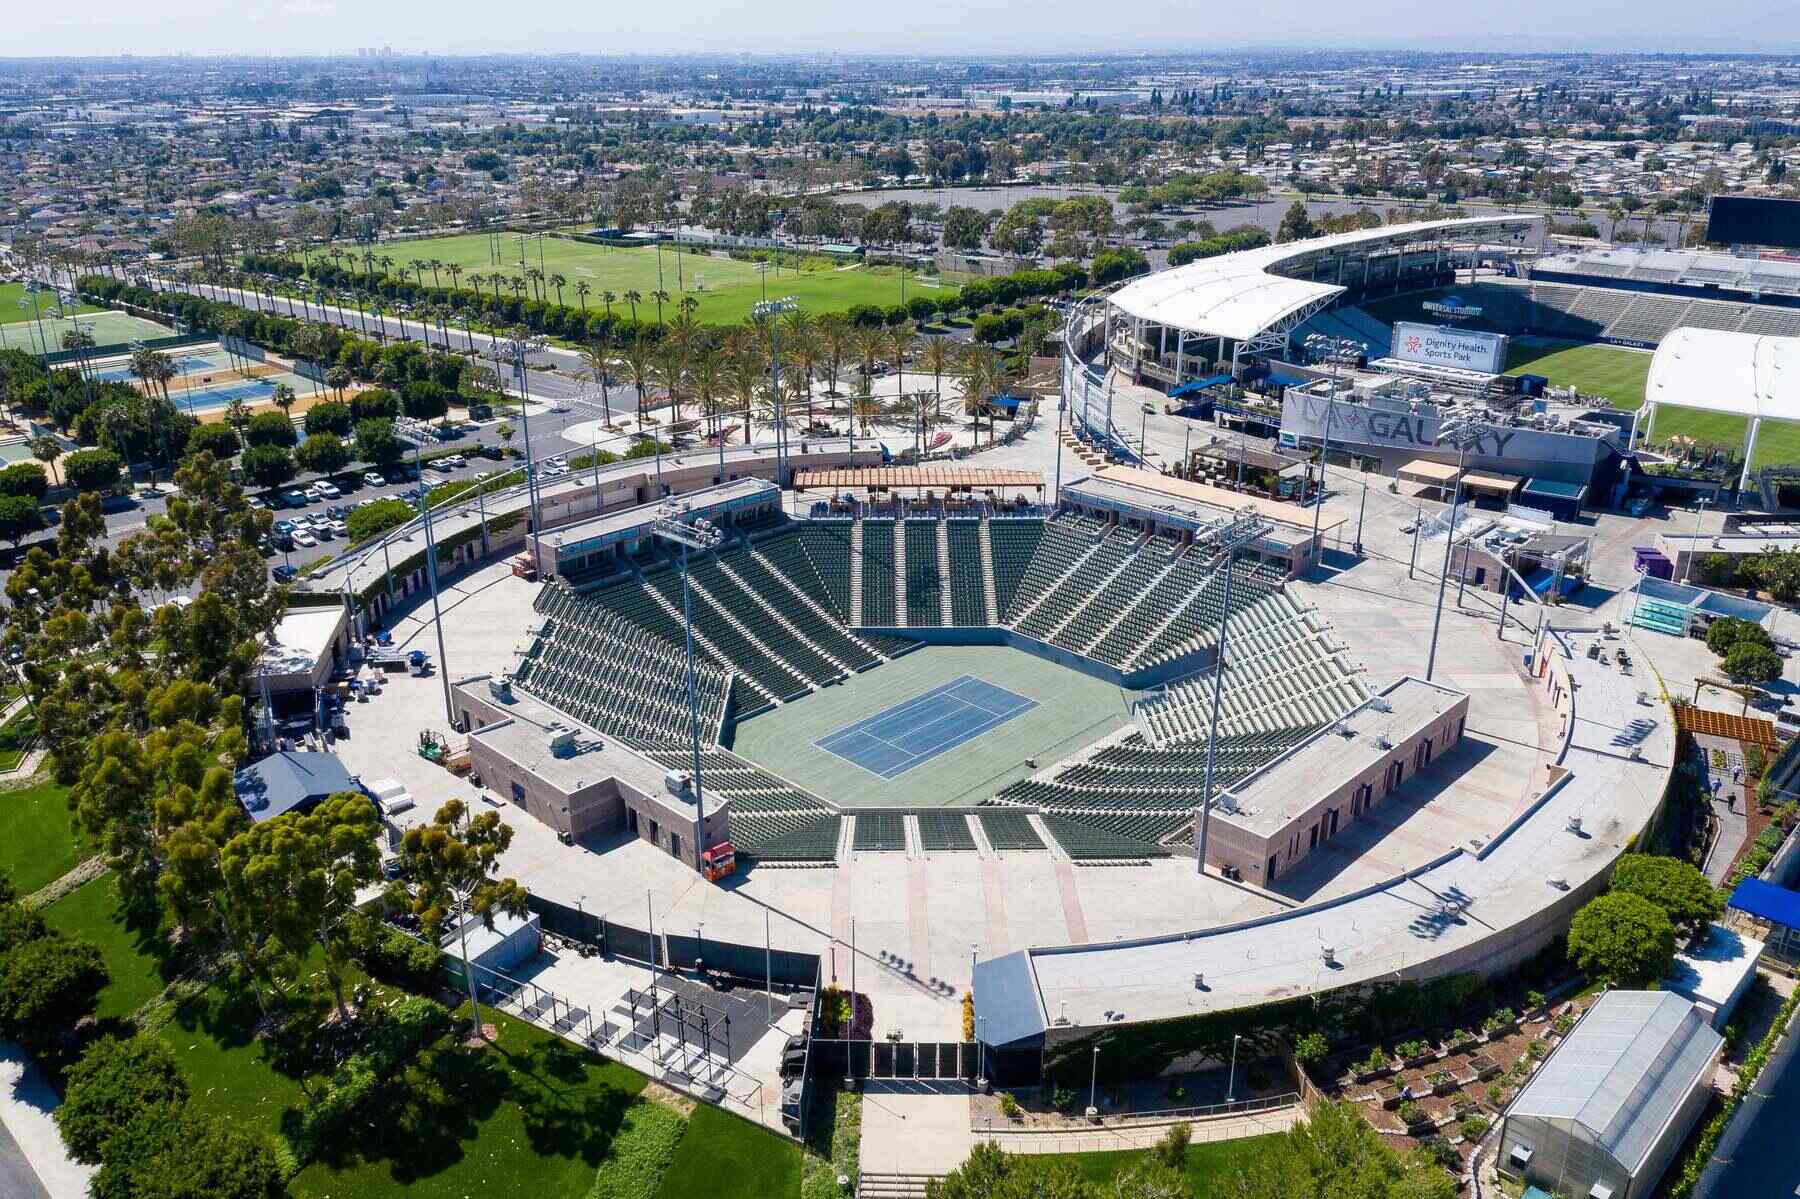 10-captivating-facts-about-stubhub-center-dignity-health-sports-park